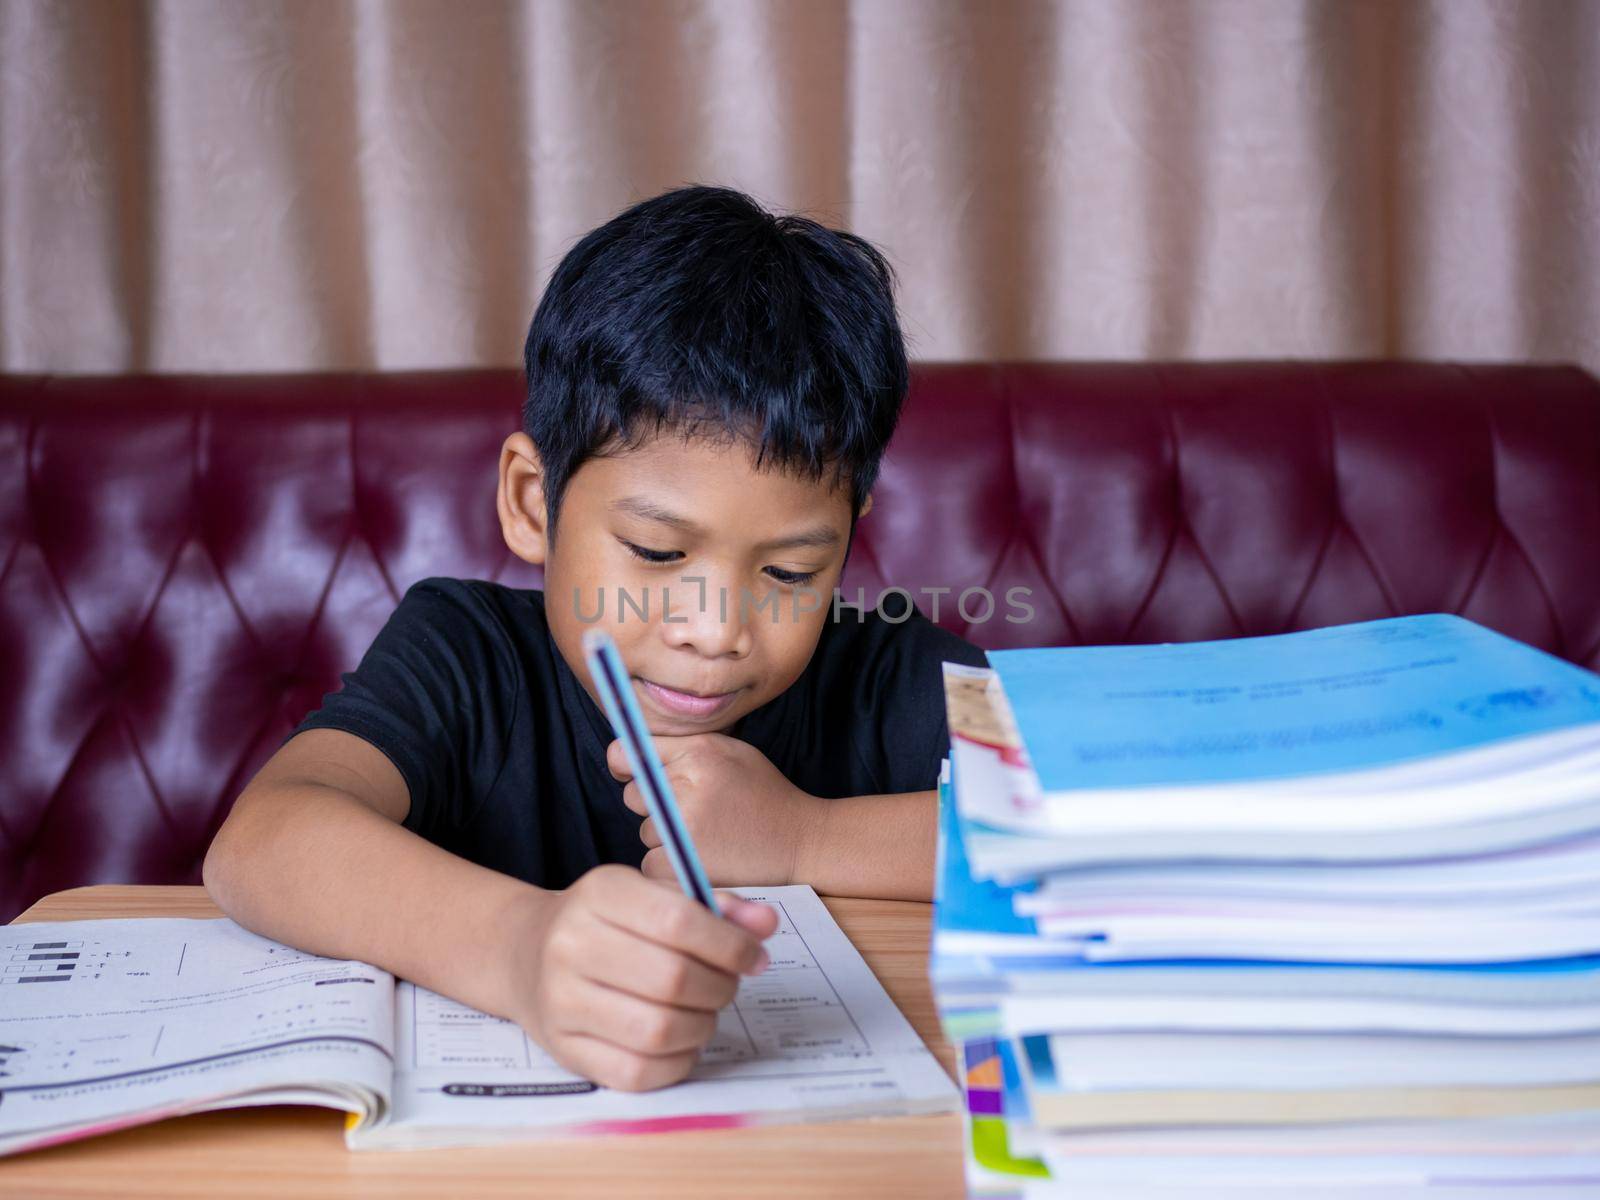 boy doing homework and reading on a wooden table with a pile of books beside The background is a red sofa and cream curtains. by Unimages2527